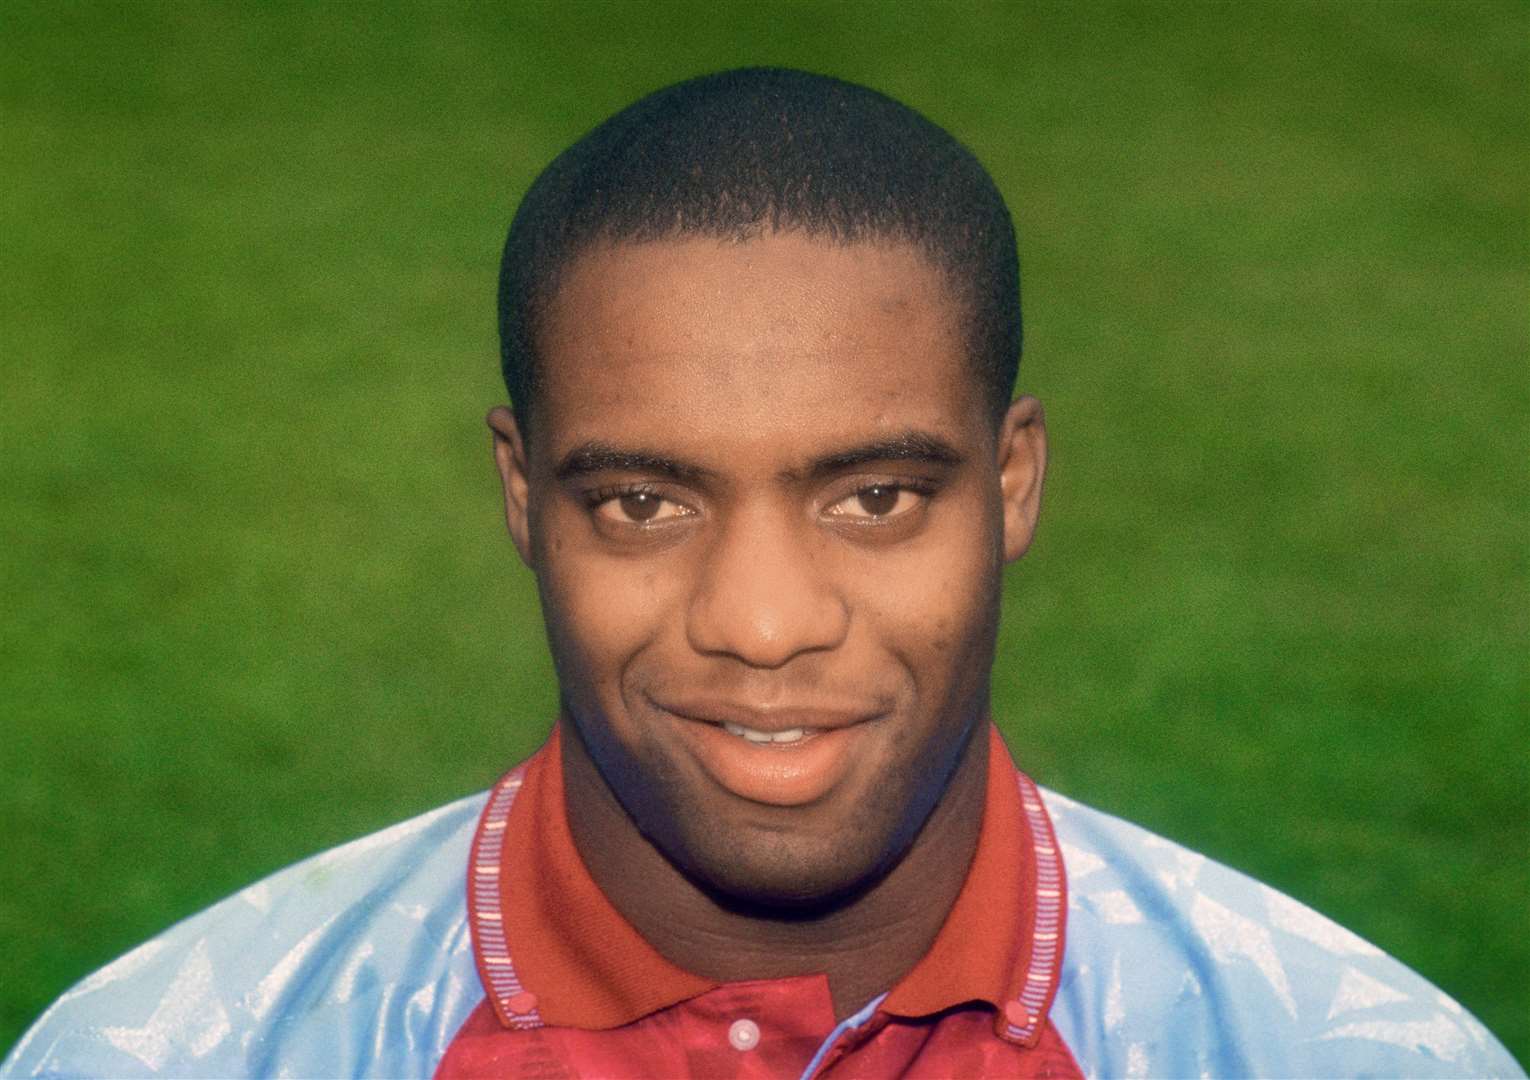 Dalian Atkinson, pictured in 1991, during his time at Aston Villa (PA)